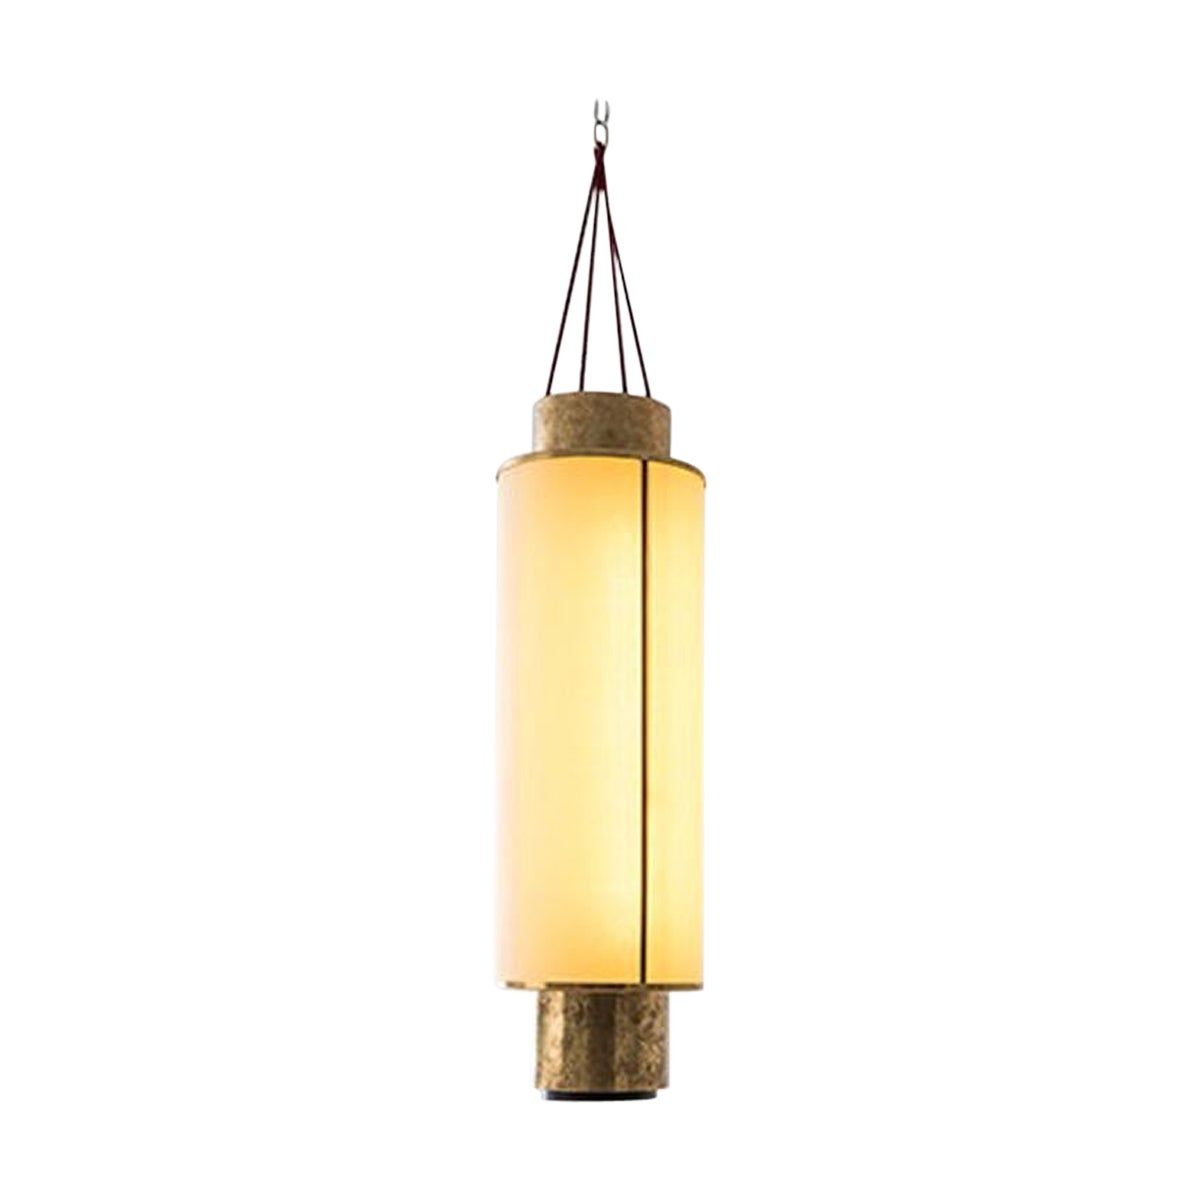 Lanterna Ceiling Lamp in Painted Metal, Brass and Paper by Dimoremilano